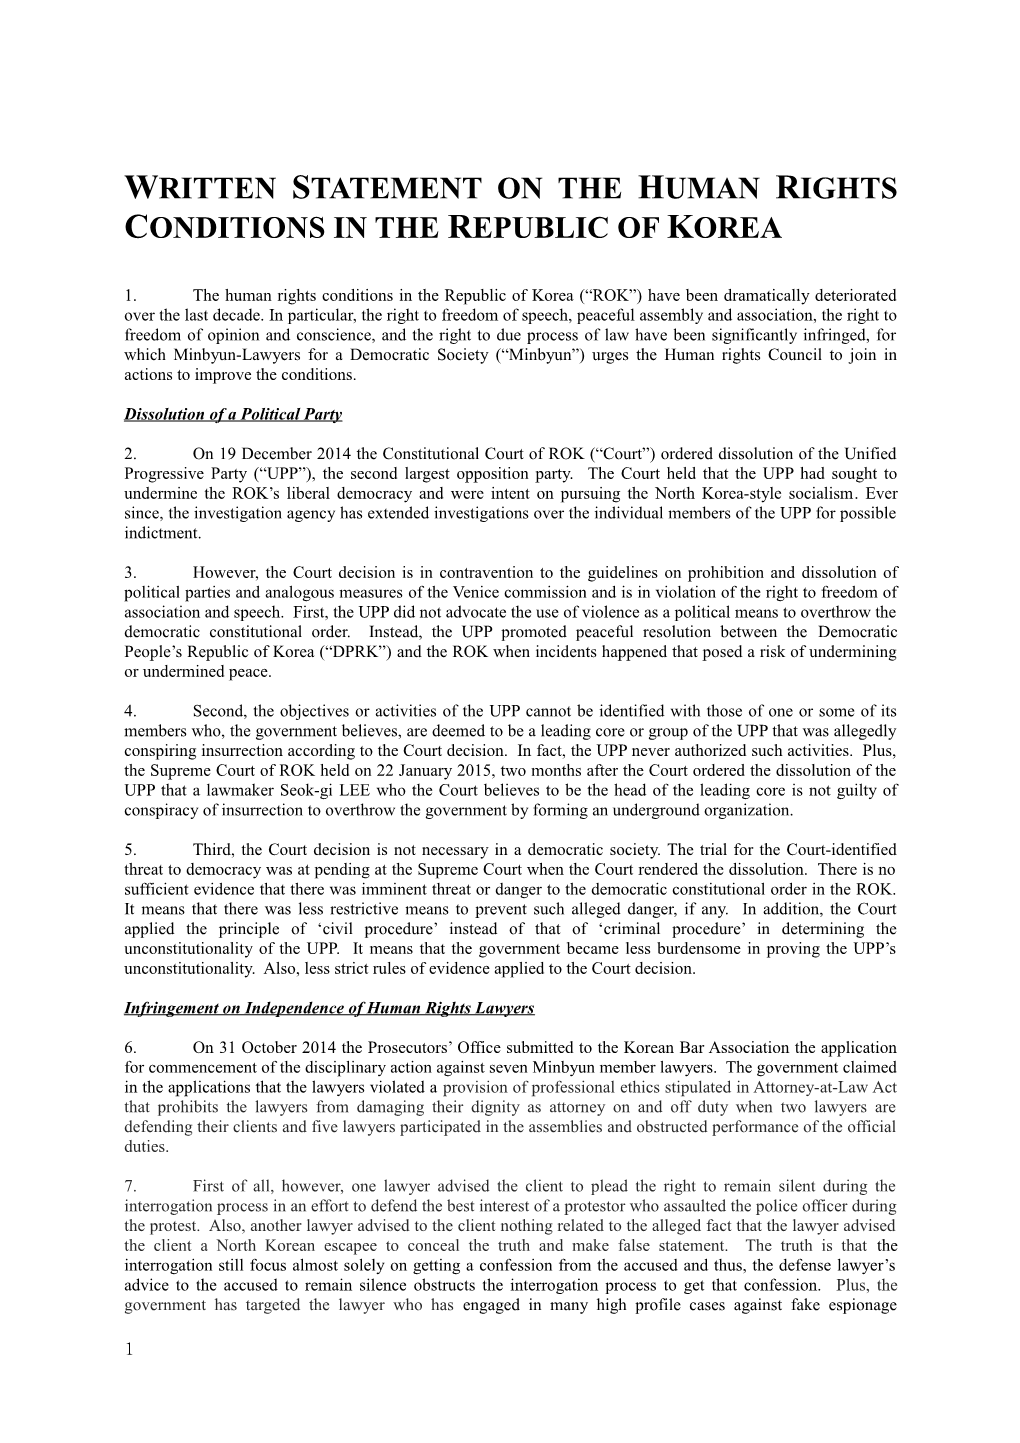 Written Statement on the Human Rights Conditions in the Republic of Korea